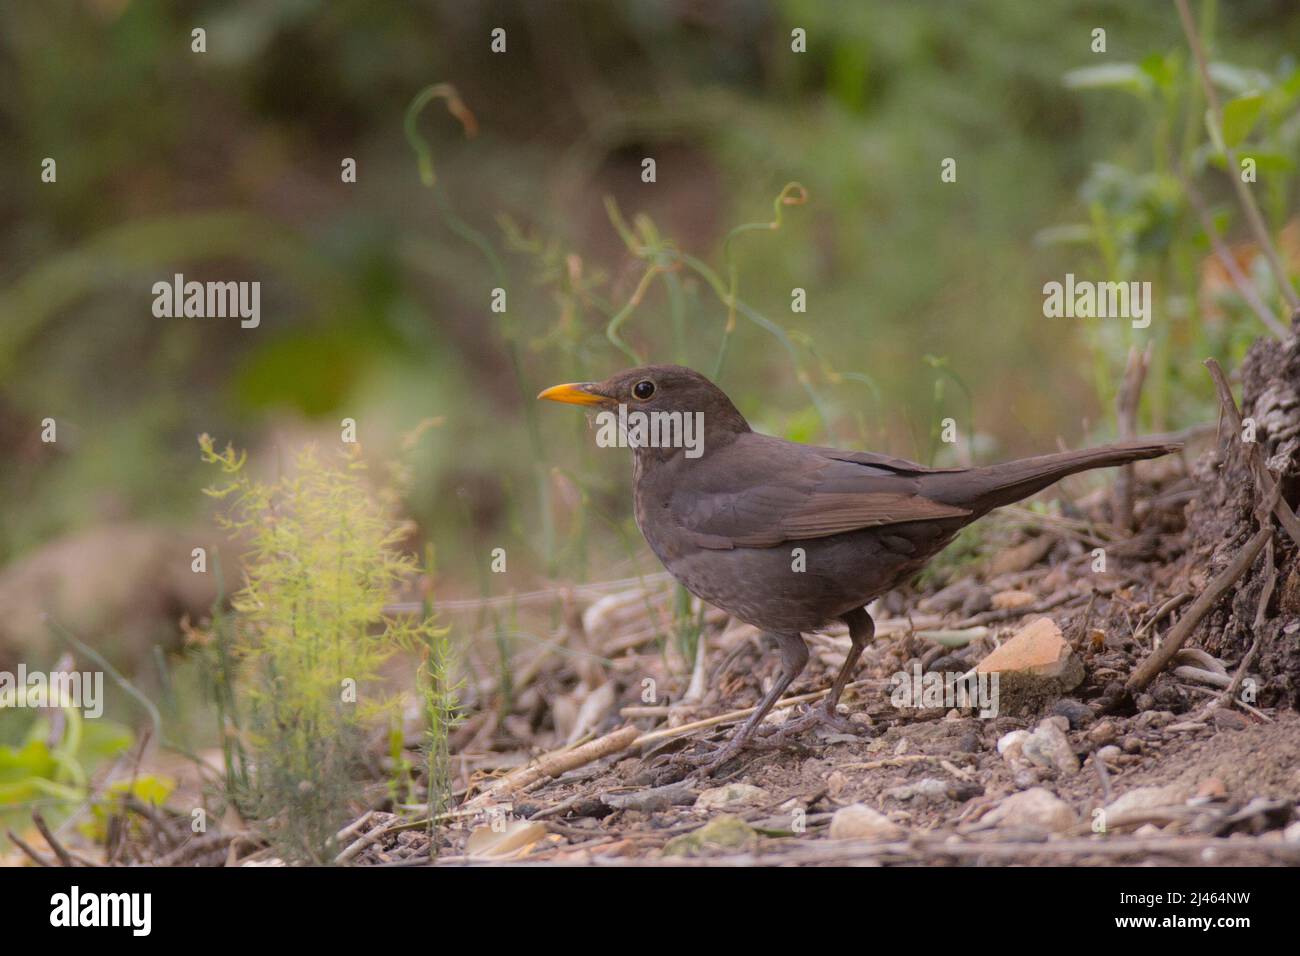 Female Common Blackbird or Eurasian Blackbird (Turdus merula) This bird is found throughout Europe and the near east and feeds on a variety of foods, Stock Photo